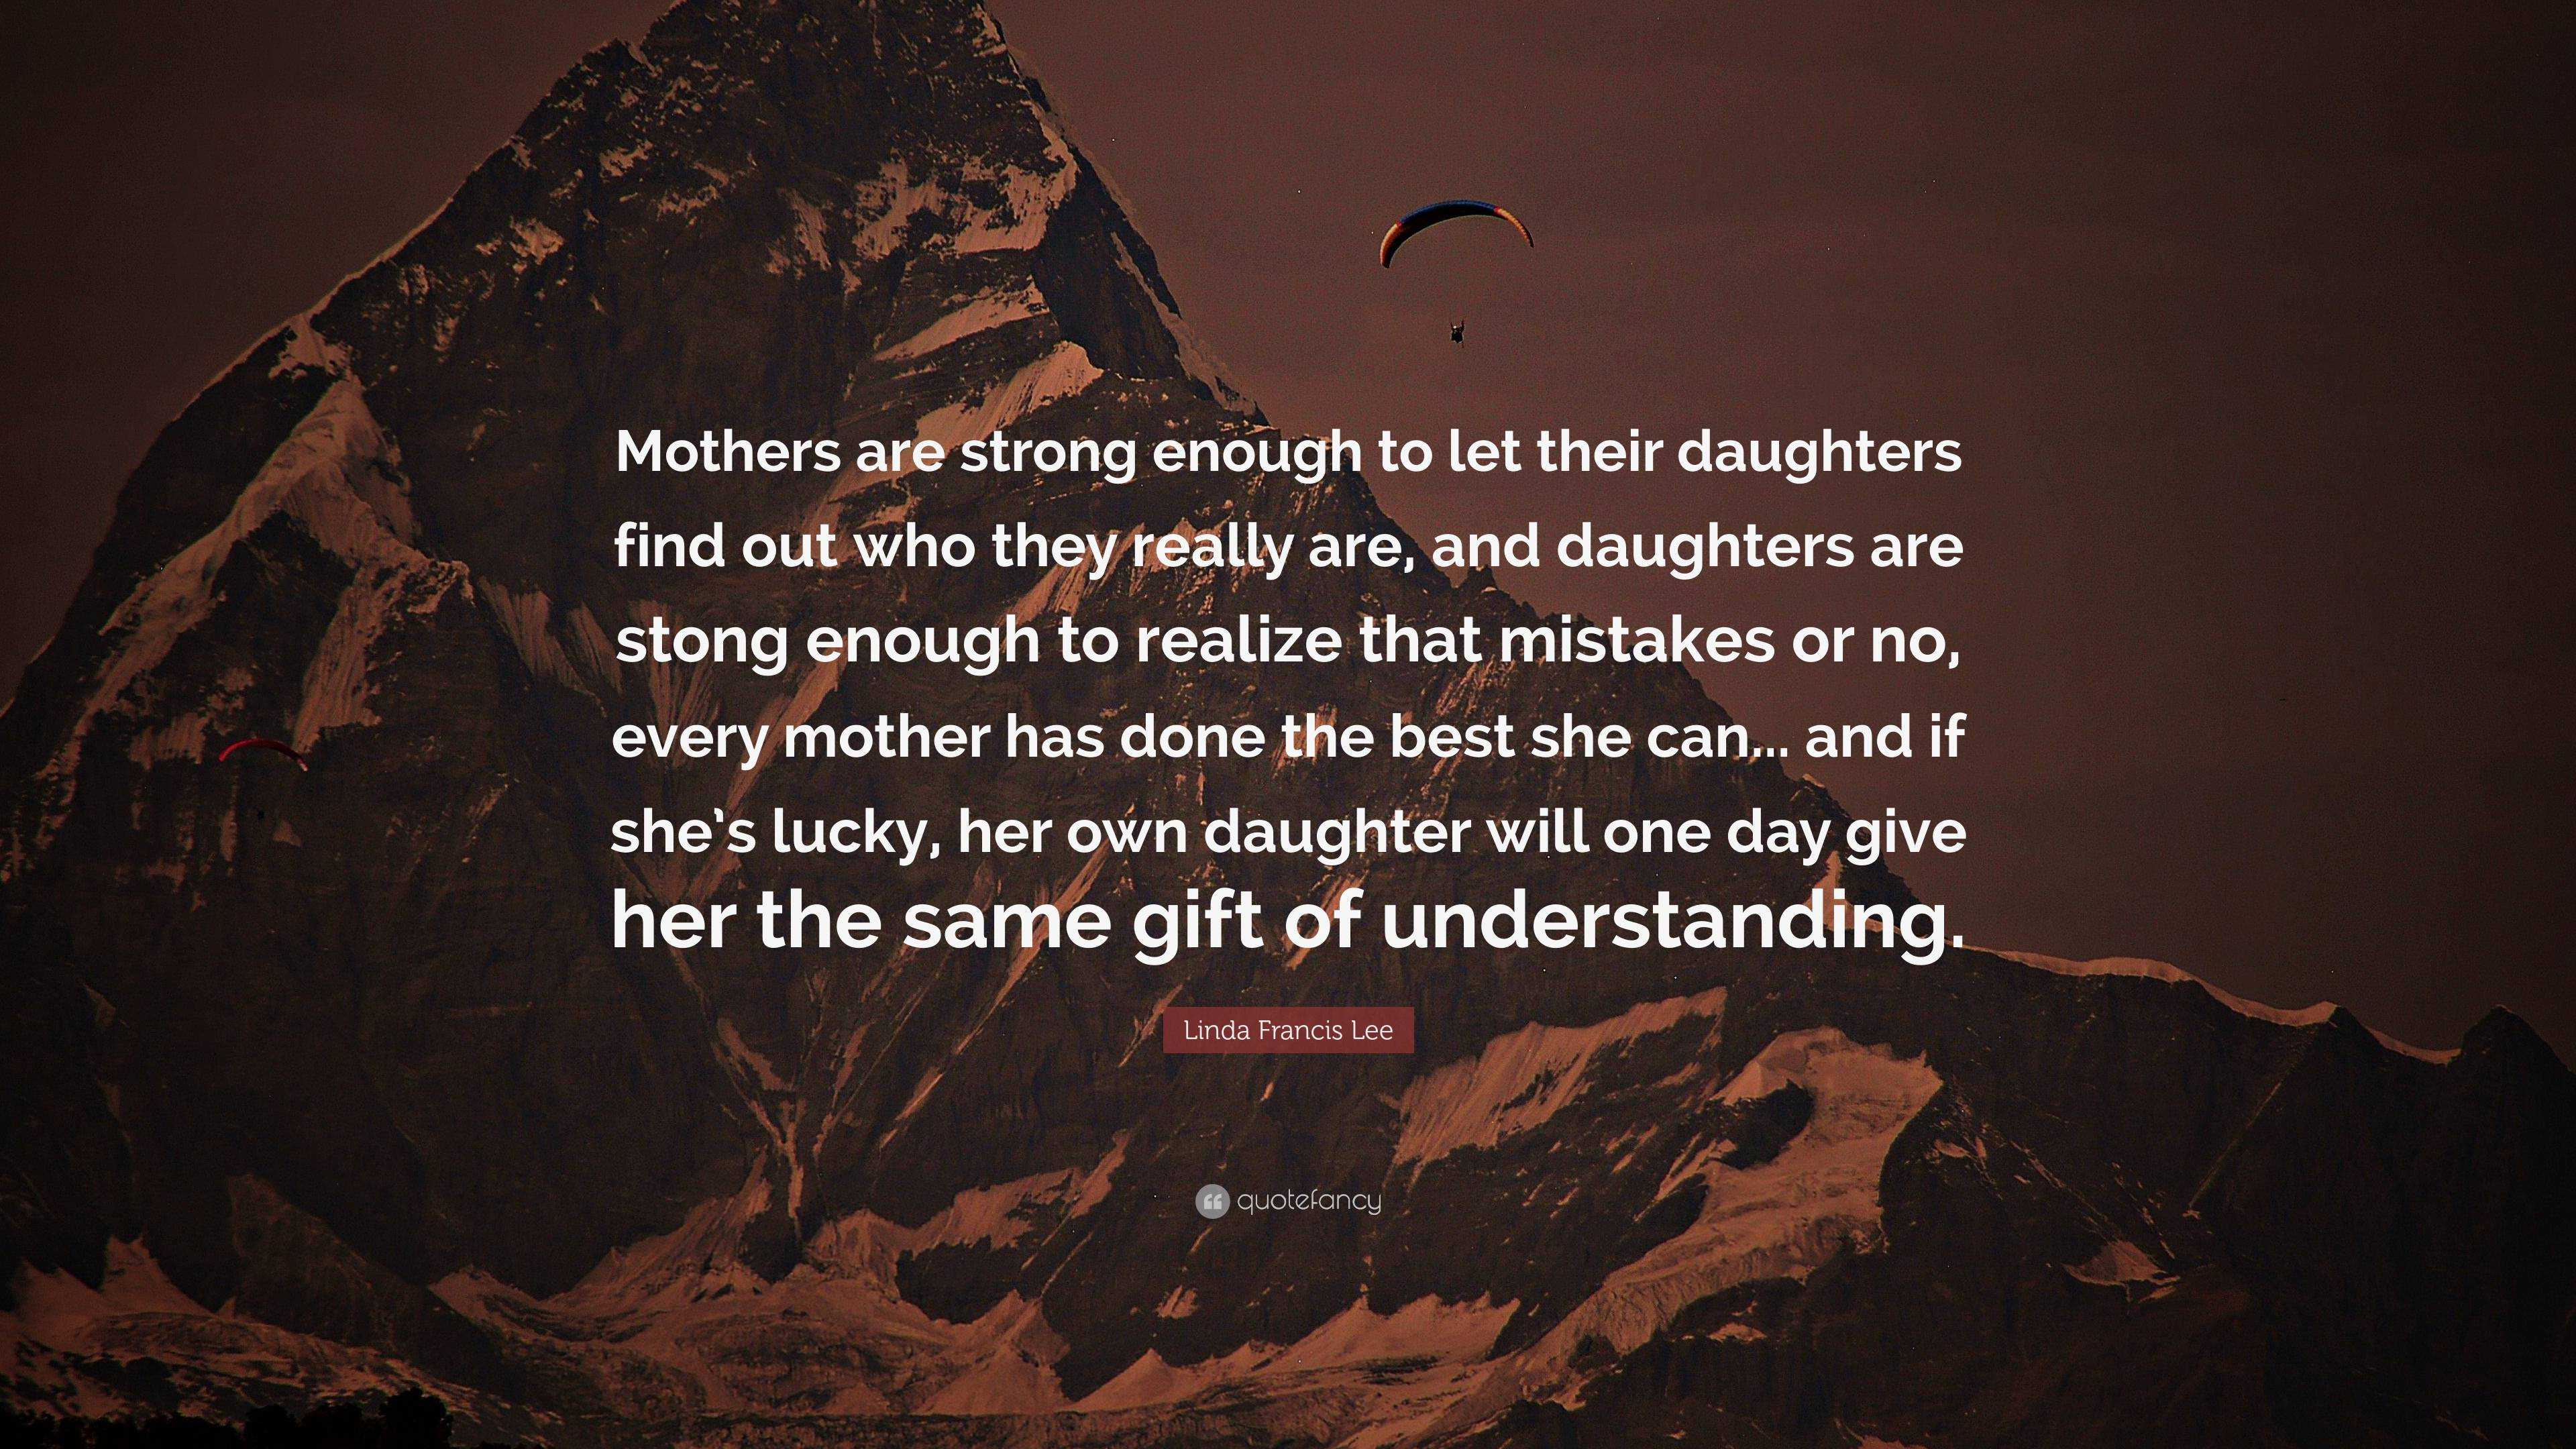 Linda Francis Lee Quote: “Mothers are strong enough to let their daughters  find out who they really are, and daughters are stong enough to realize”